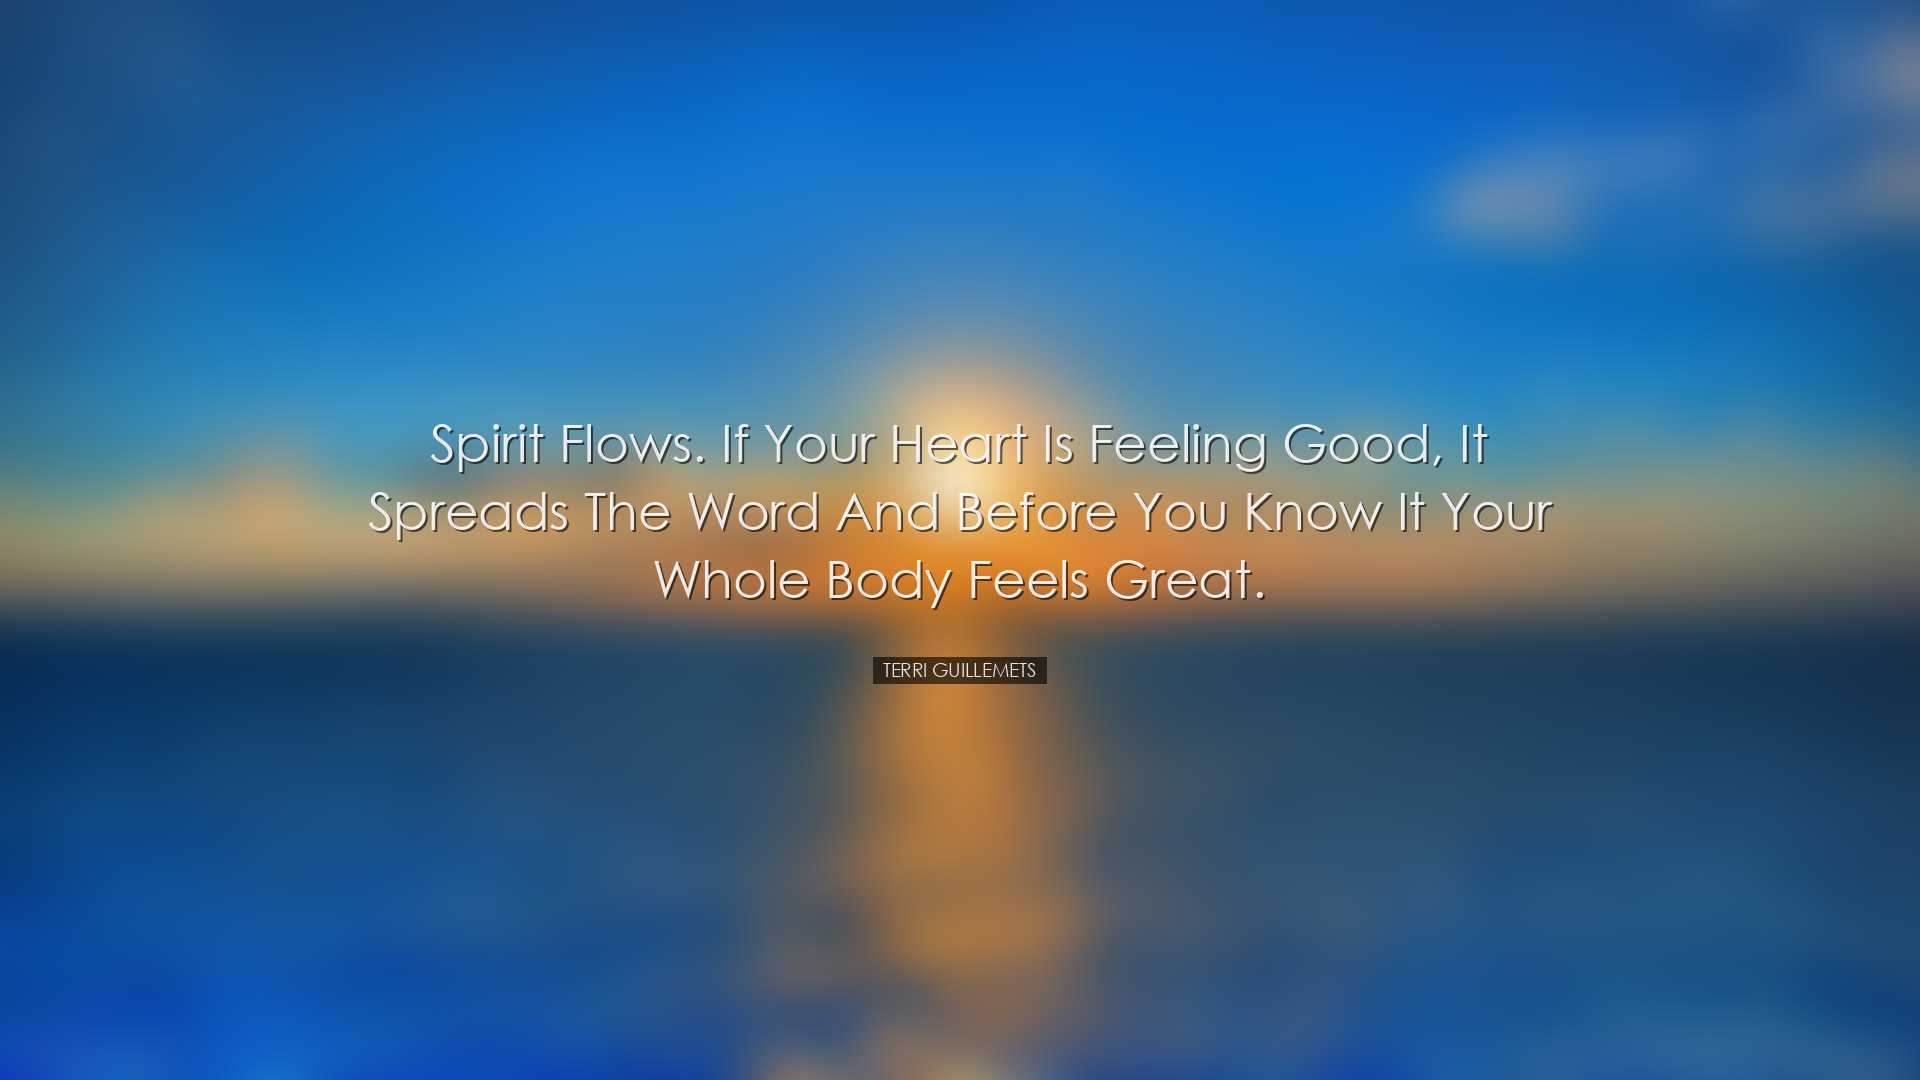 Spirit flows. If your heart is feeling good, it spreads the word a